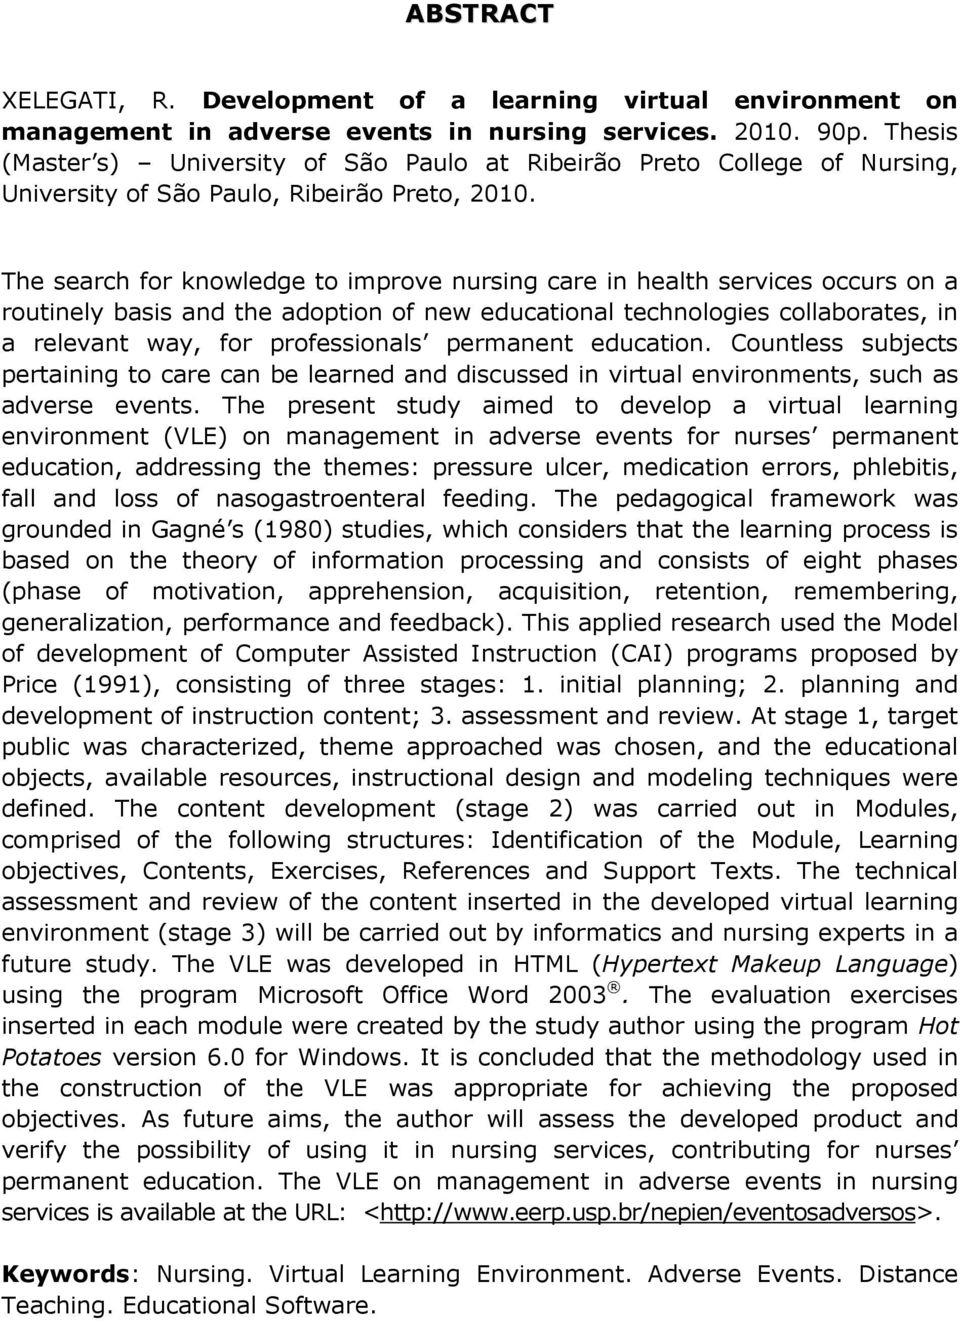 The search for knowledge to improve nursing care in health services occurs on a routinely basis and the adoption of new educational technologies collaborates, in a relevant way, for professionals